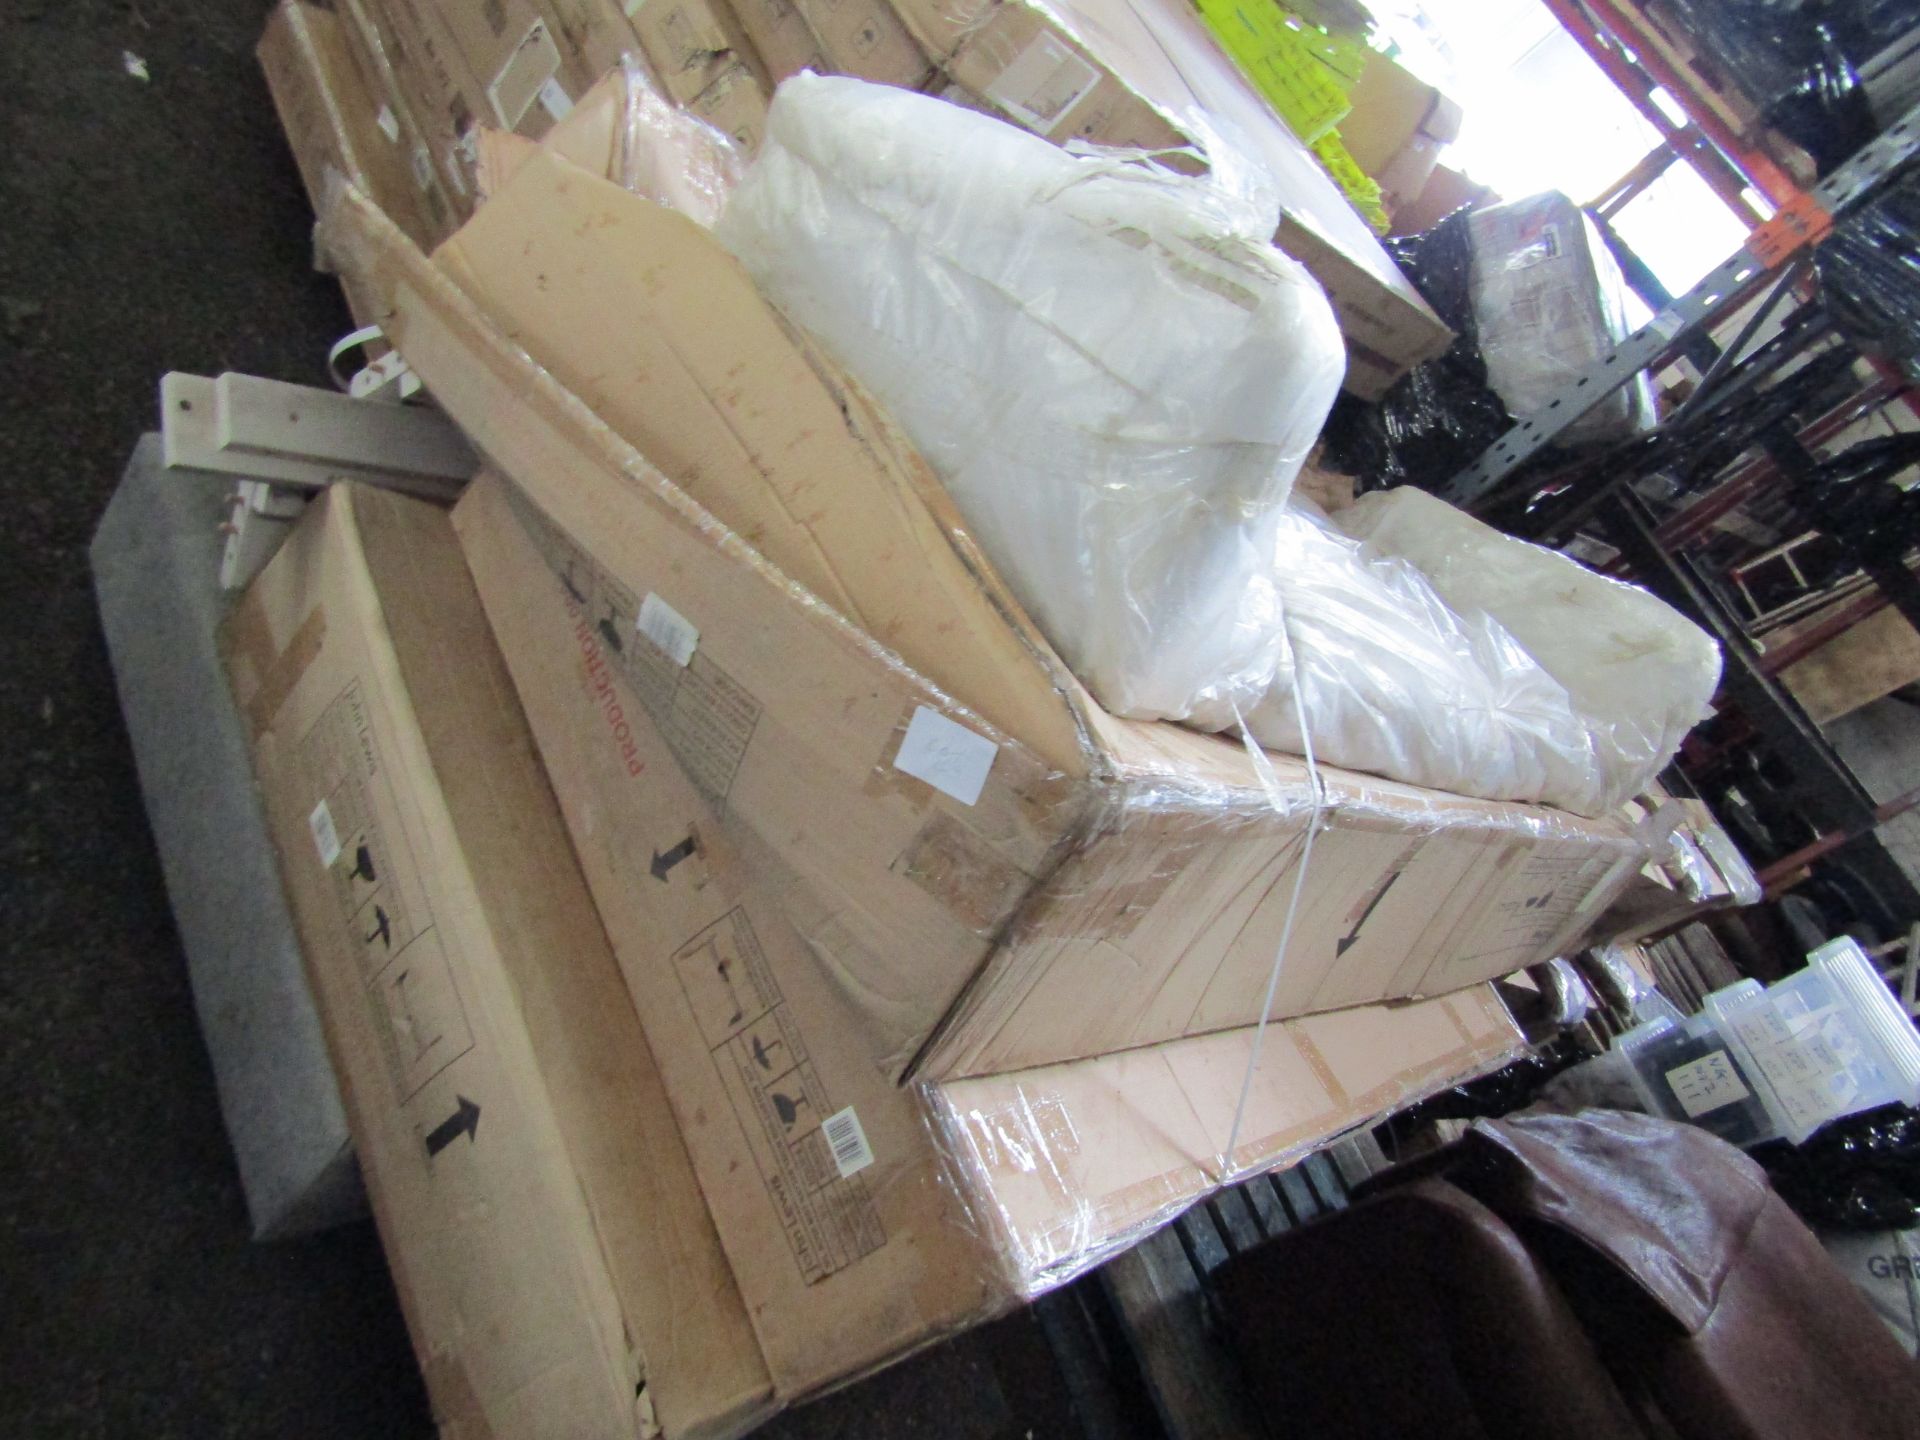 Pallet of JL parts/returns. Unmanifested & unchecked by us